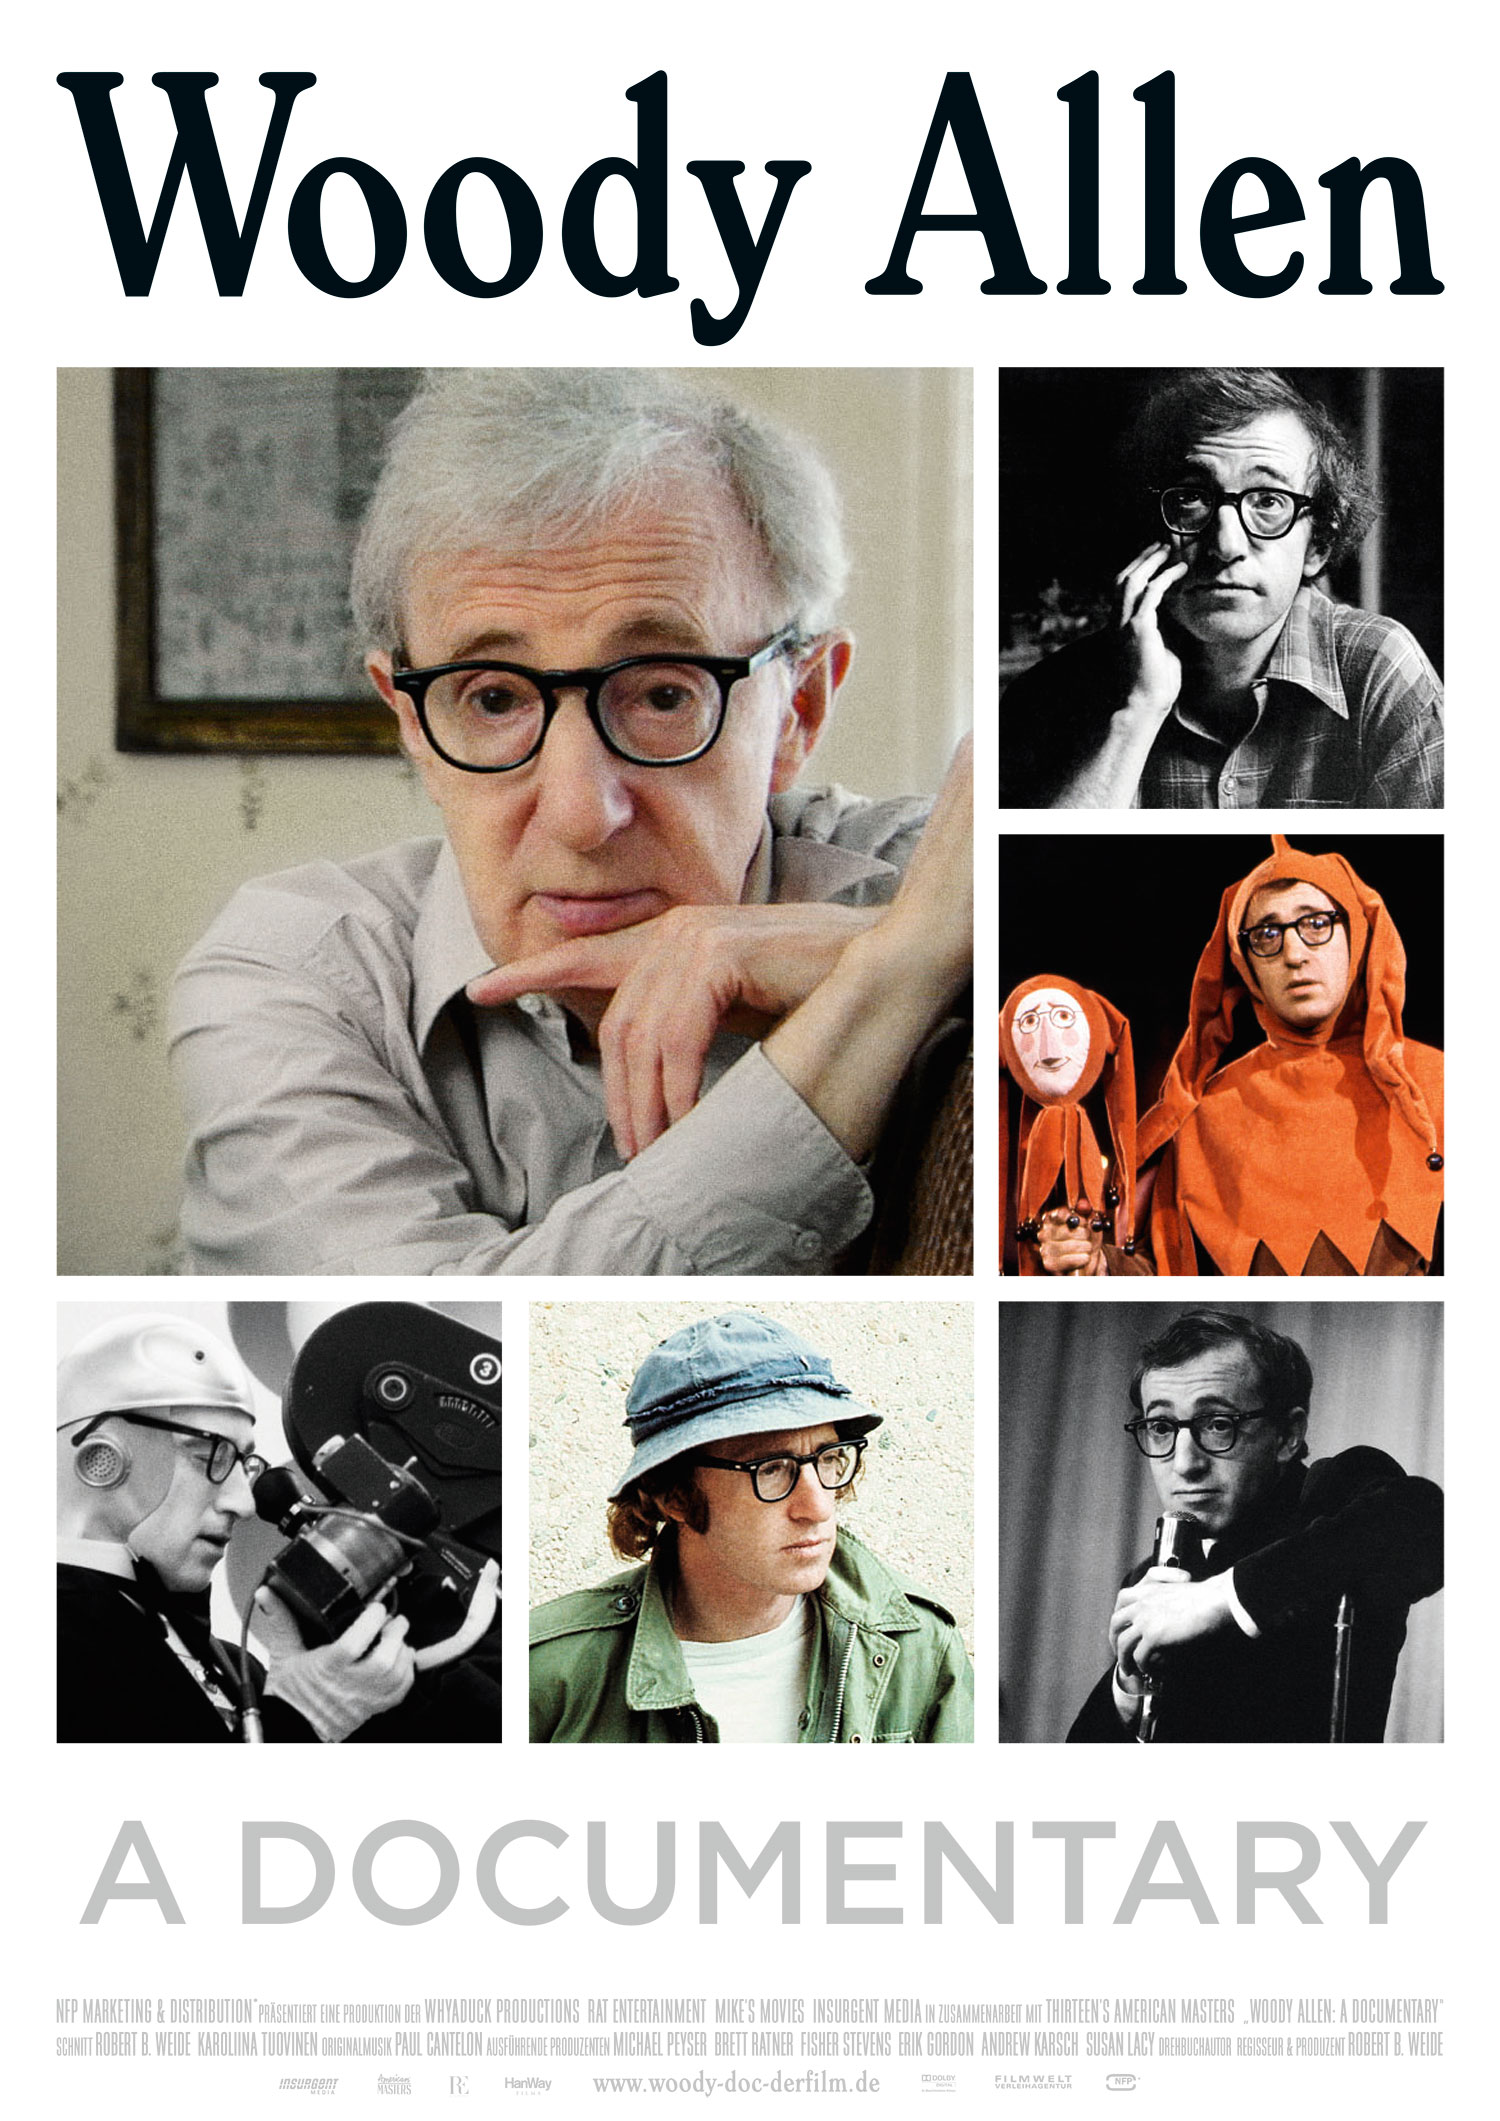 NFP*<a href="/woody-allen">→</a><strong>Adaption</strong>